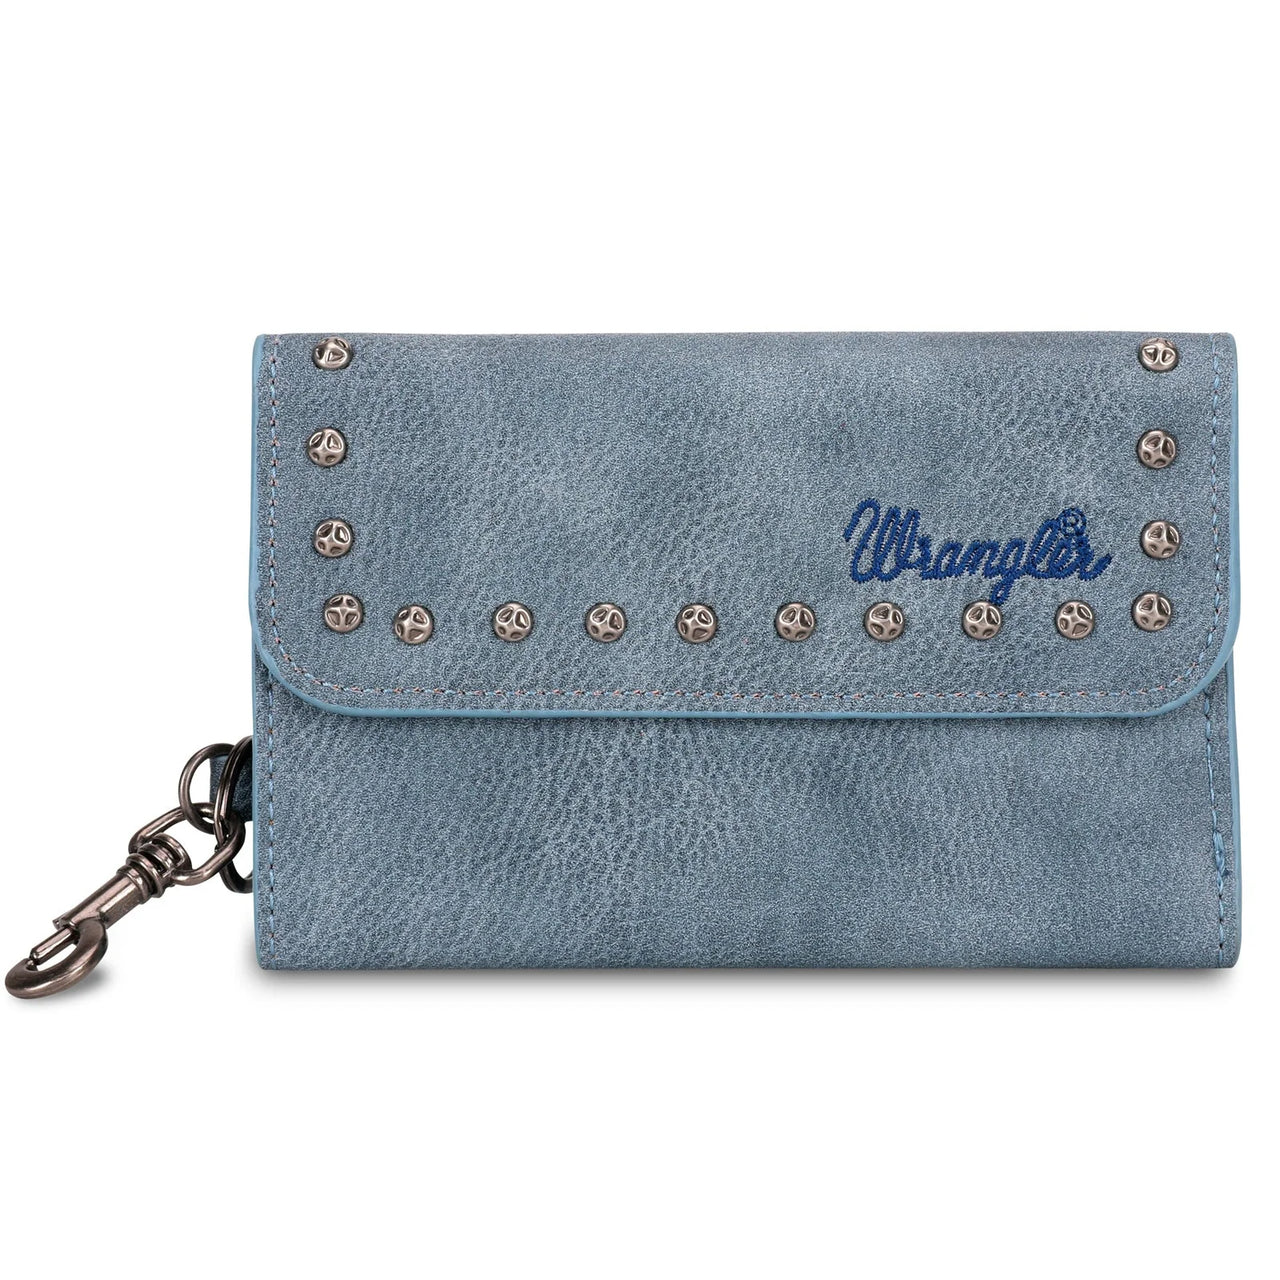 Wrangler Studded Accents Tri-Fold Keychain Wallet - Jean